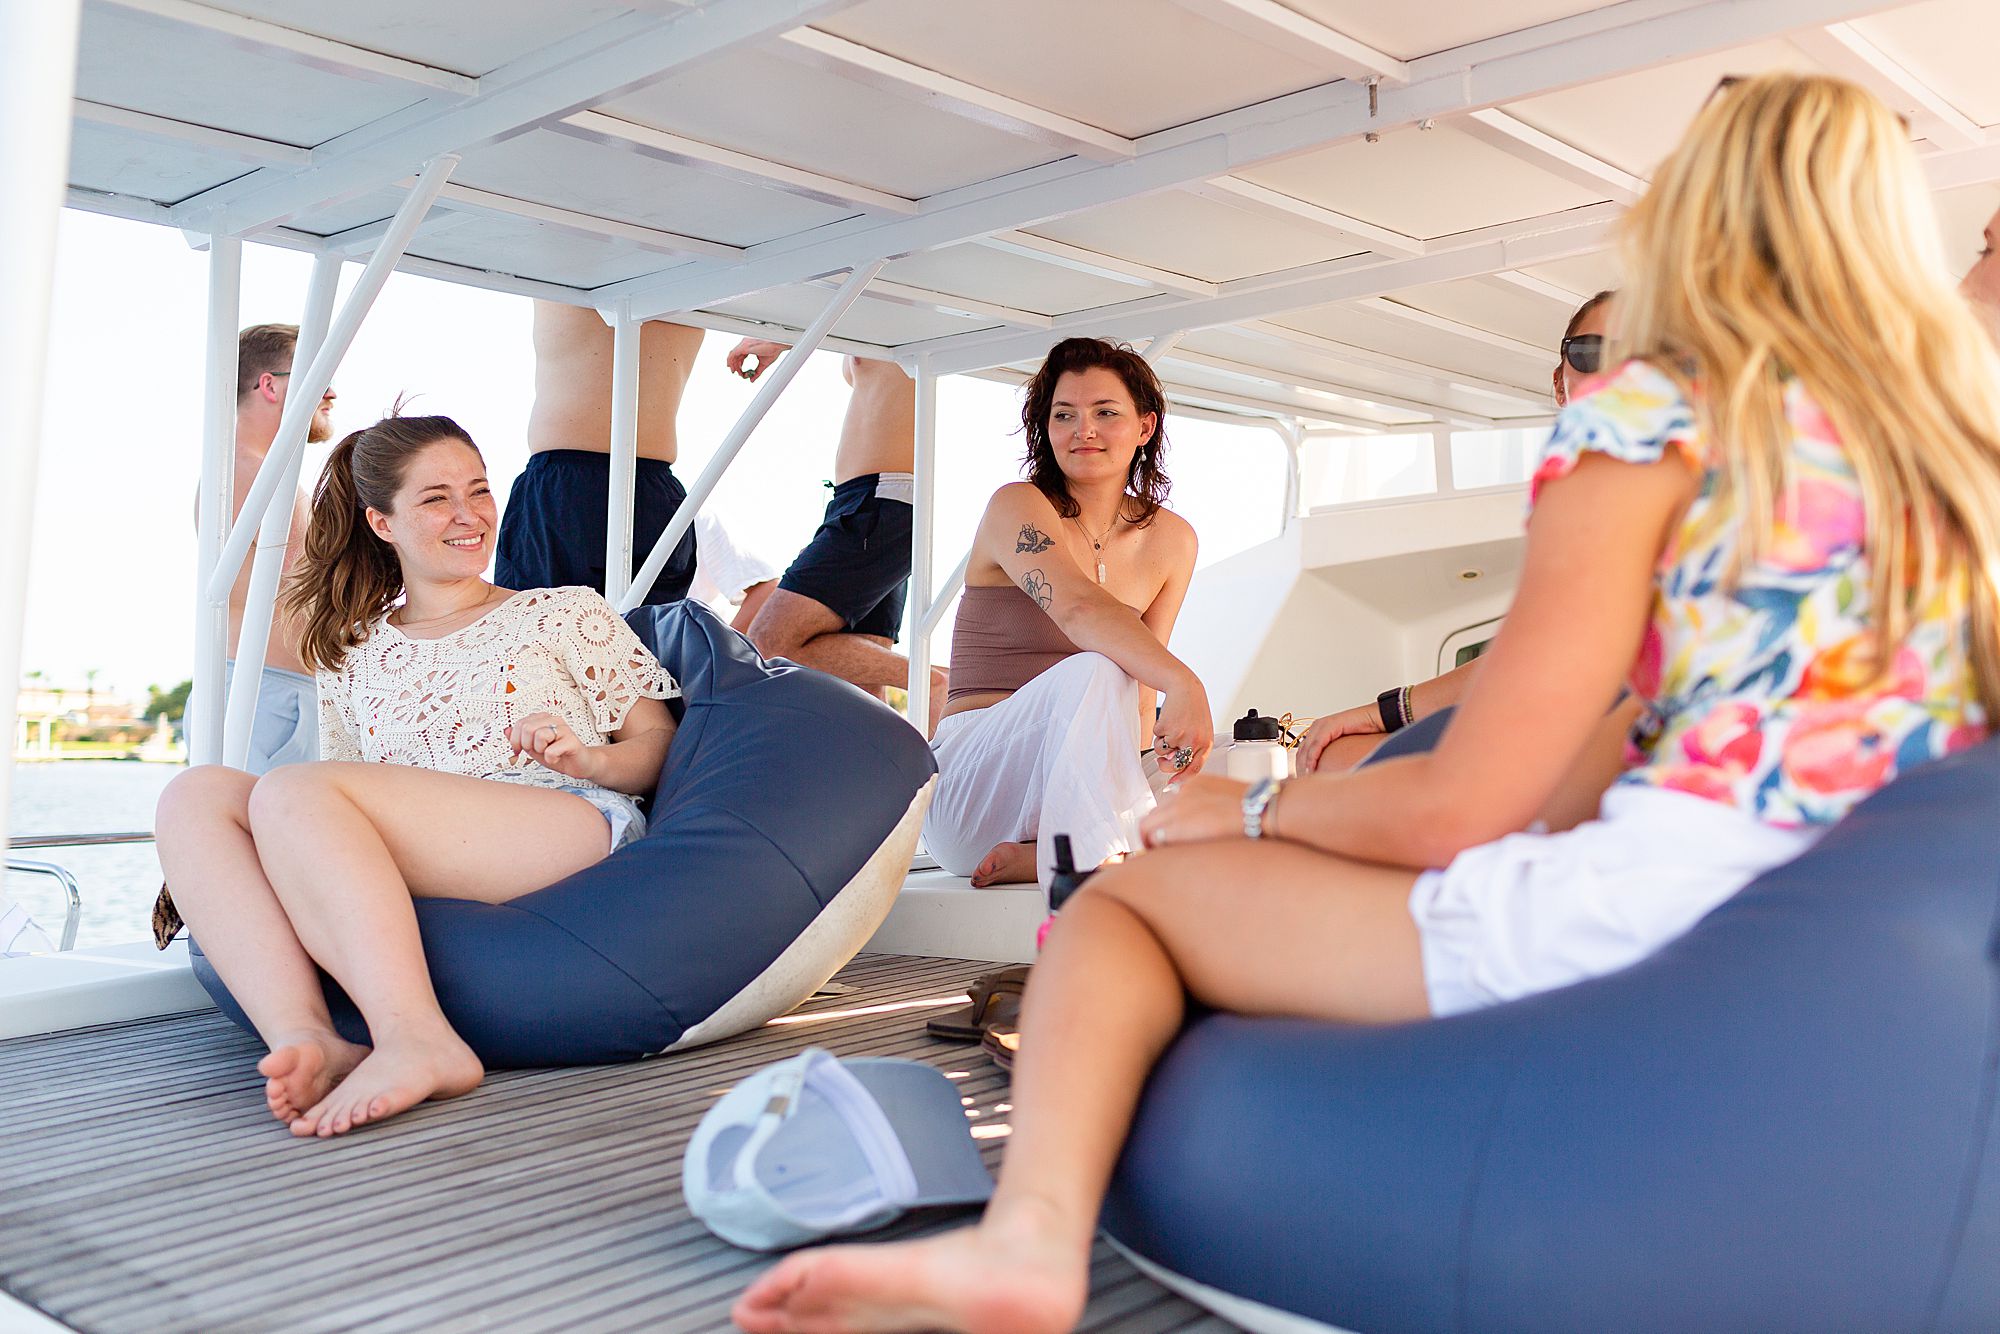 A group of women laugh together on the lower deck of a catamaran.